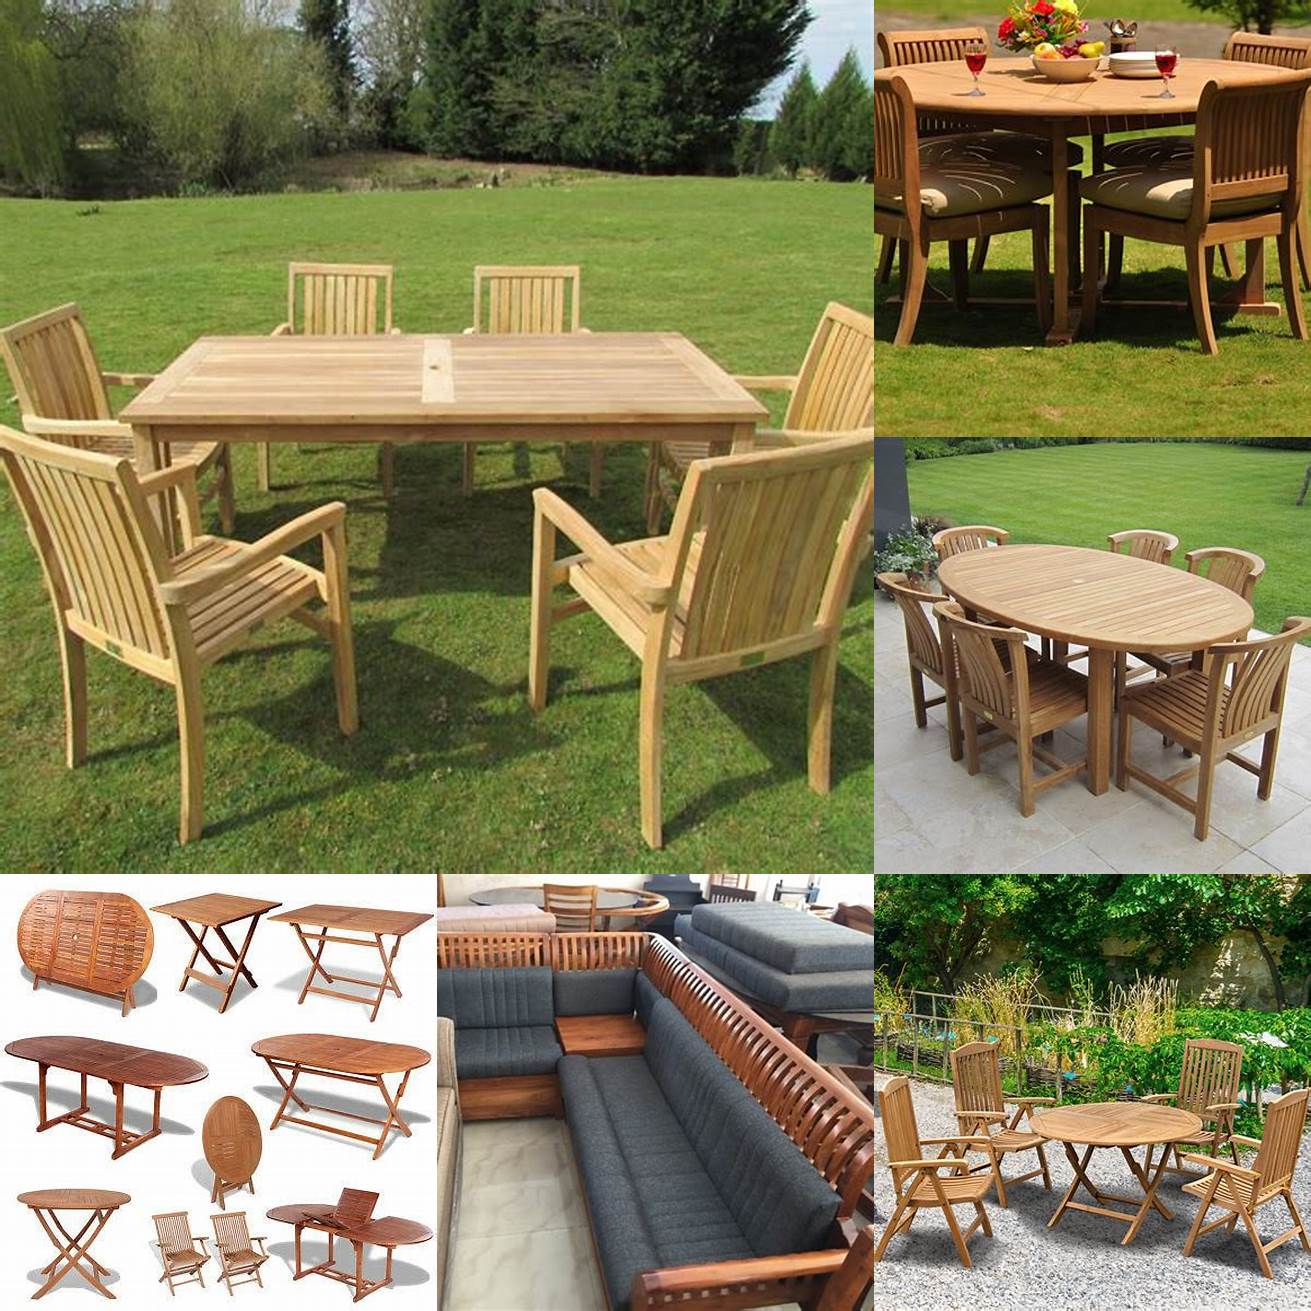 Teak furniture in different shapes and sizes